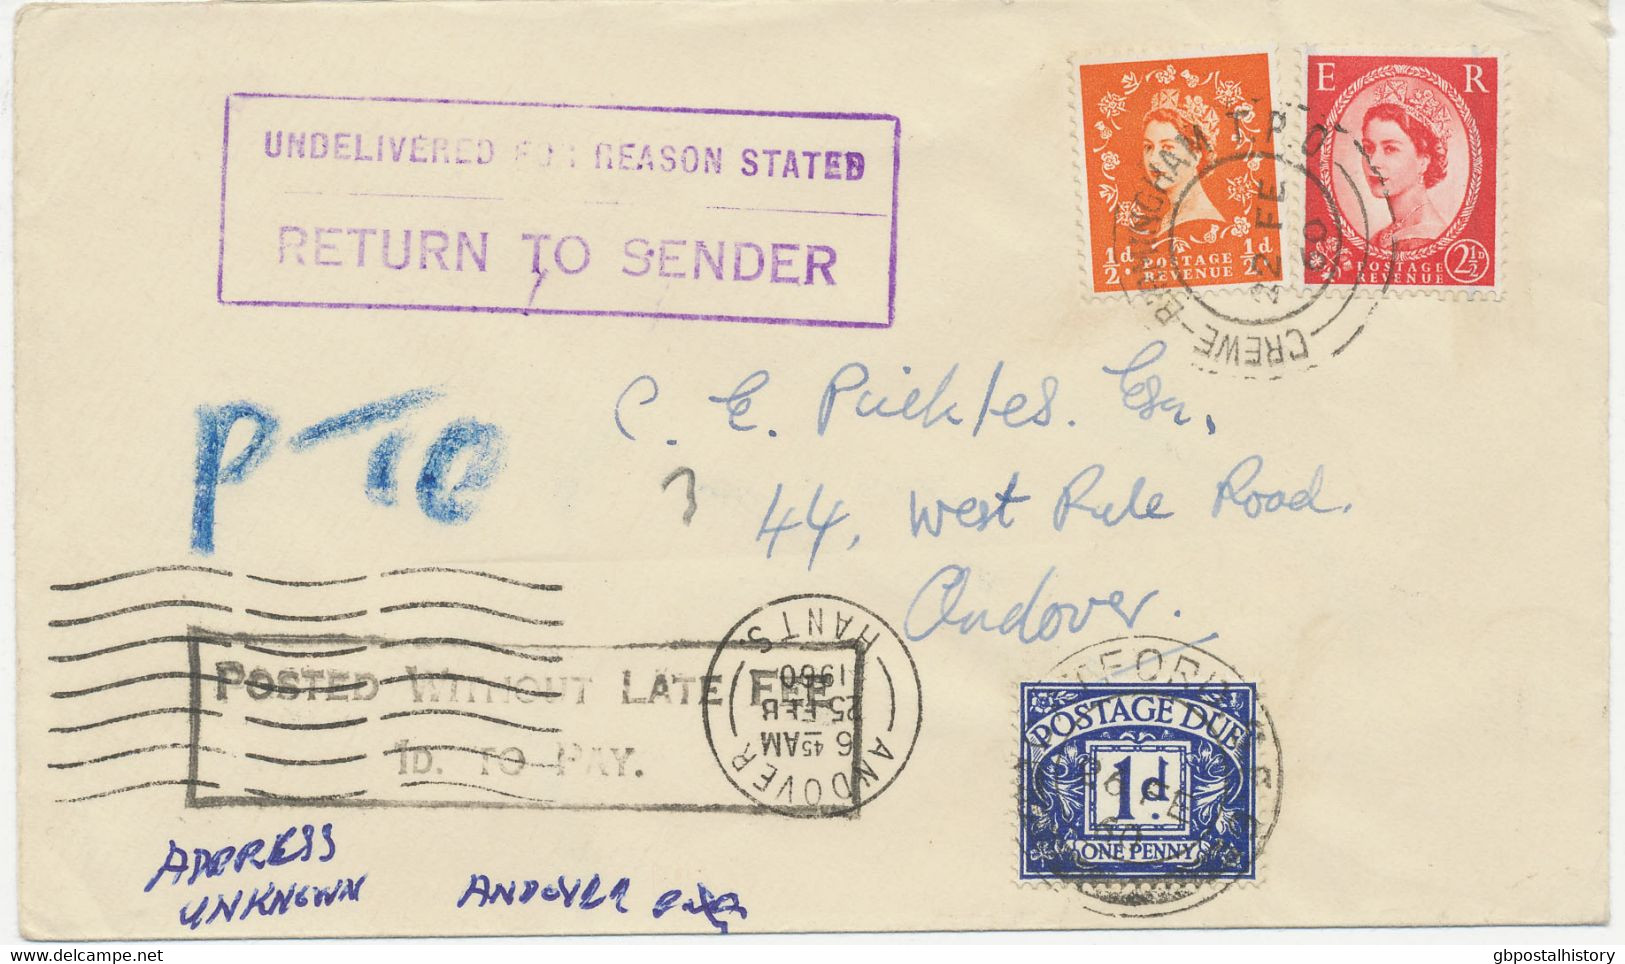 GB 1960 QEII 1/2d And 2 1/2d As Well As Postage Due 1d On Very Fine Rare Cover W. Railway-K2 "CREWE - BIRMINGHAM T.P.O." - Brieven En Documenten